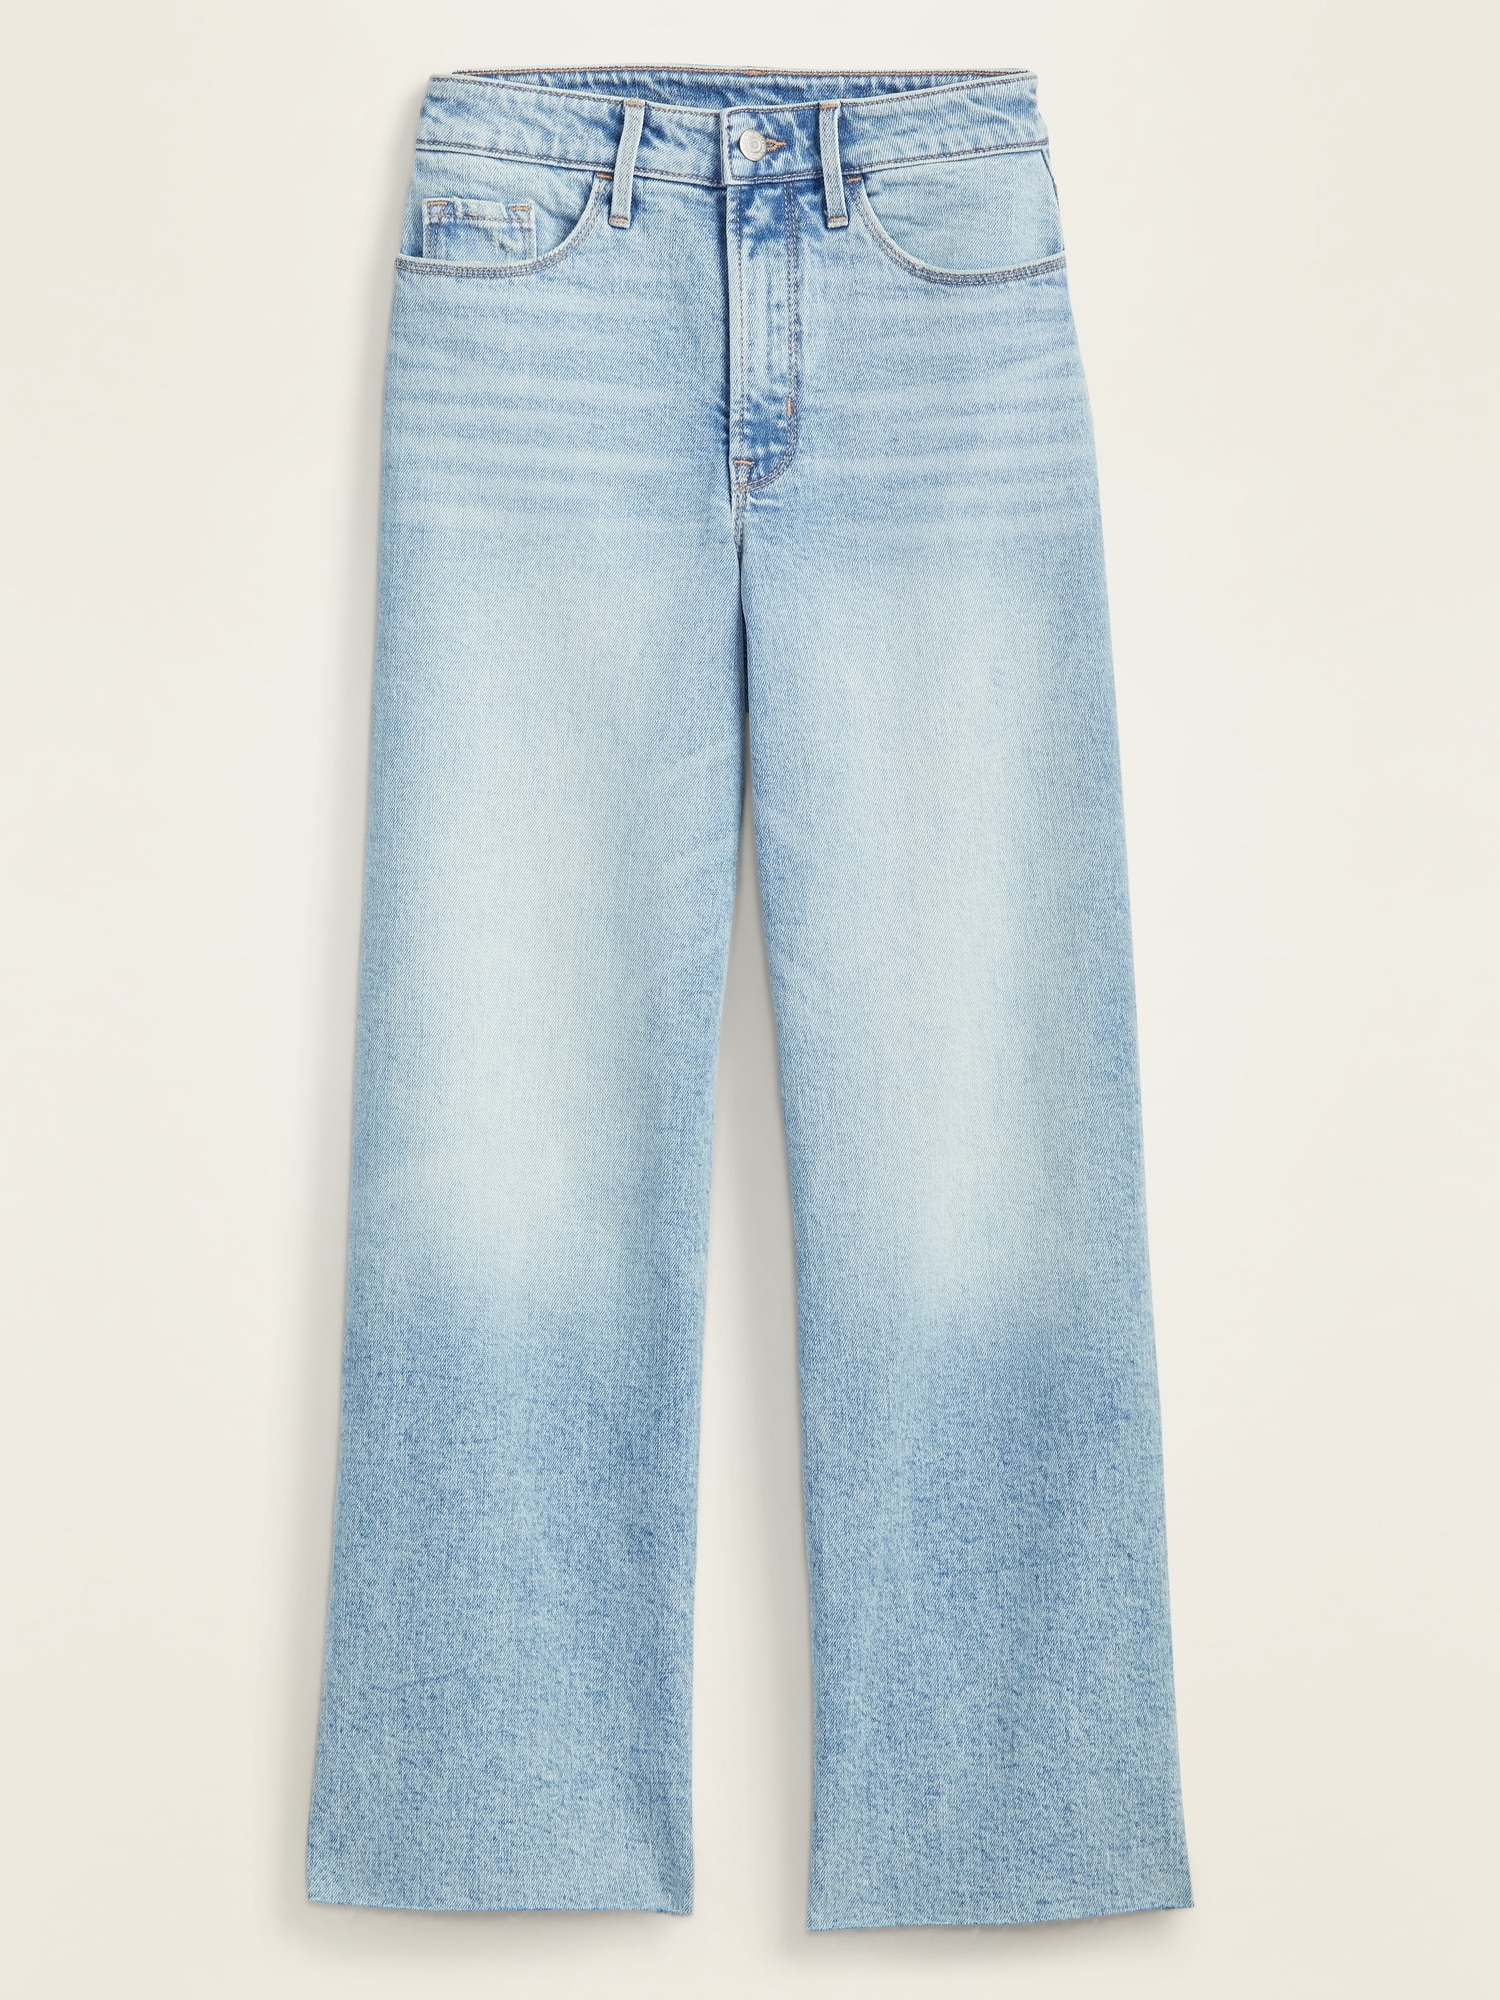 old navy wide leg jeans